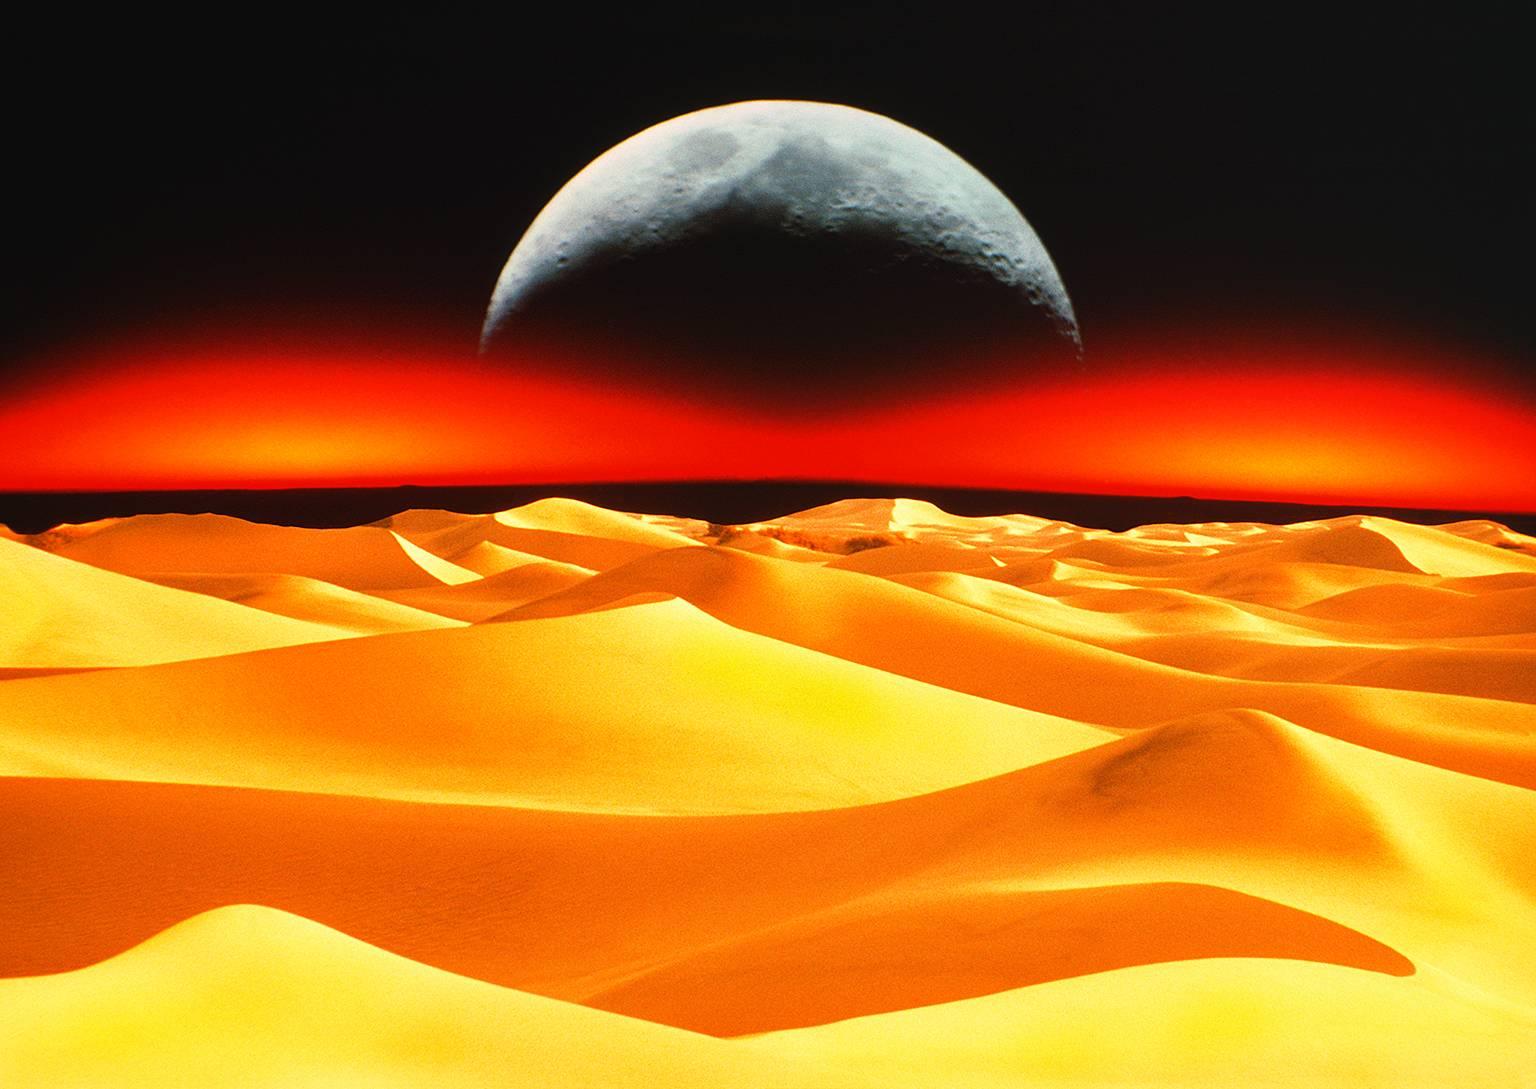 Mitchell Funk Color Photograph - Sci-Fi  Sand Dunes to the Moon